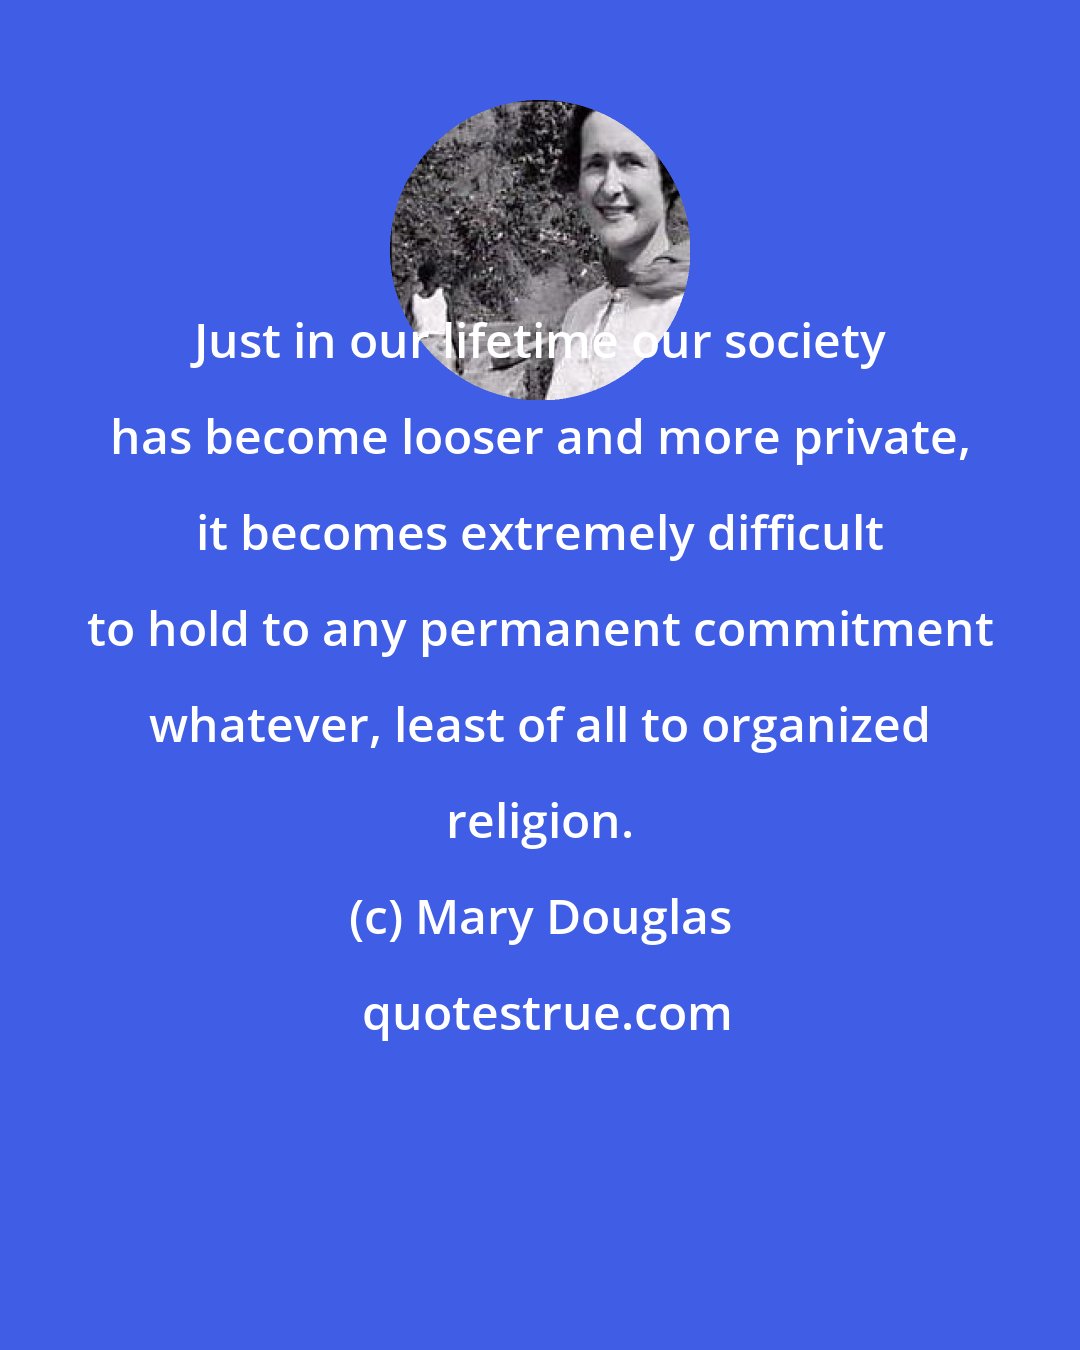 Mary Douglas: Just in our lifetime our society has become looser and more private, it becomes extremely difficult to hold to any permanent commitment whatever, least of all to organized religion.